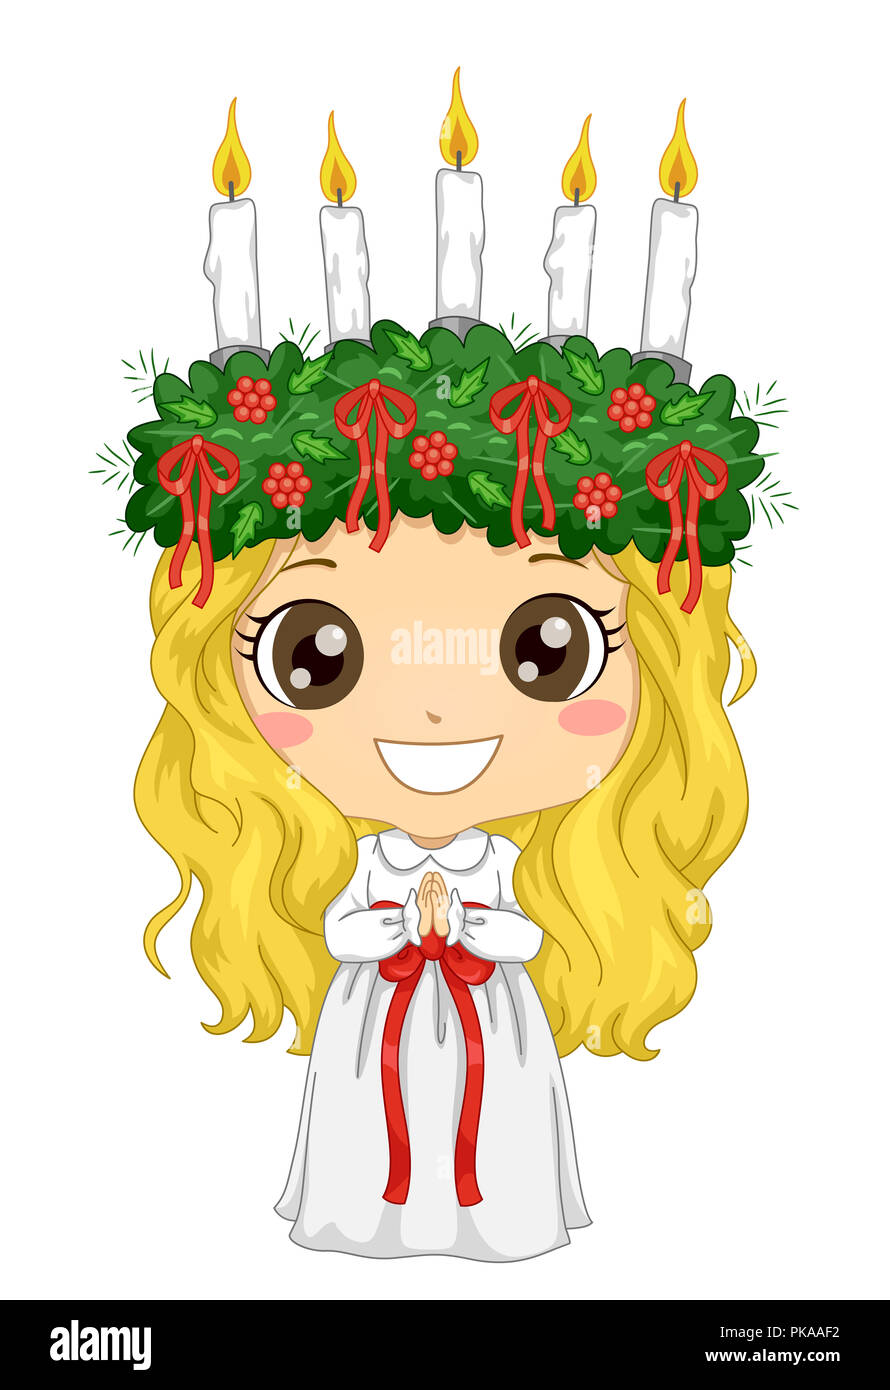 Illustration of a Kid Girl Wearing a Little Lucia Costume for the Feast of Saint Lucia Stock Photo